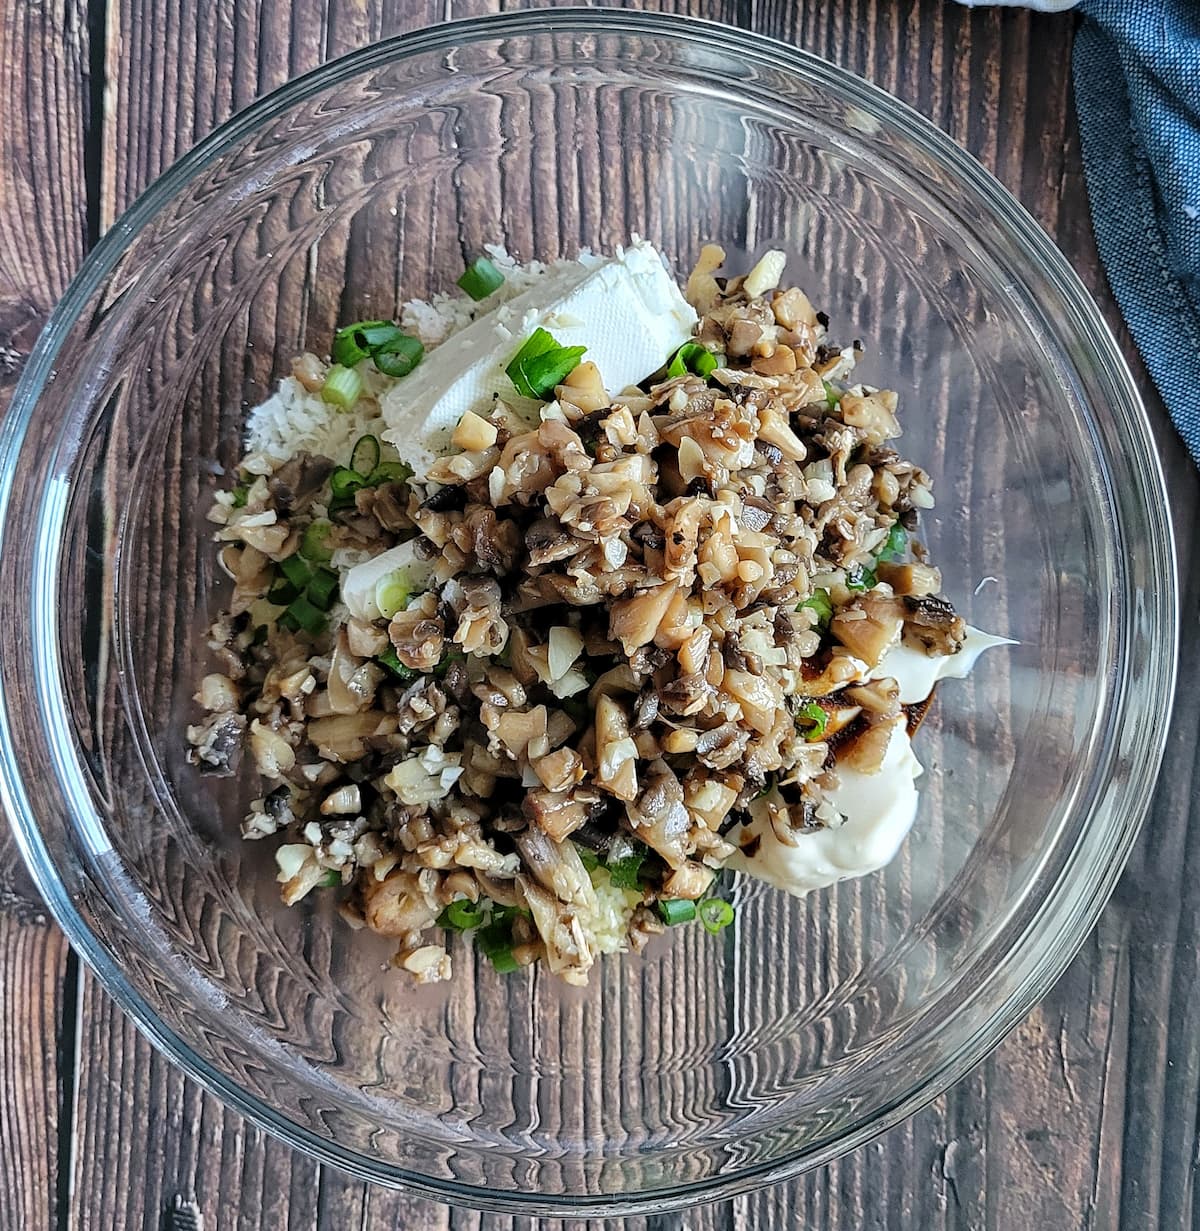 chopped mushrooms, green onions, cream cheese and other ingredients unmixed in a bowl